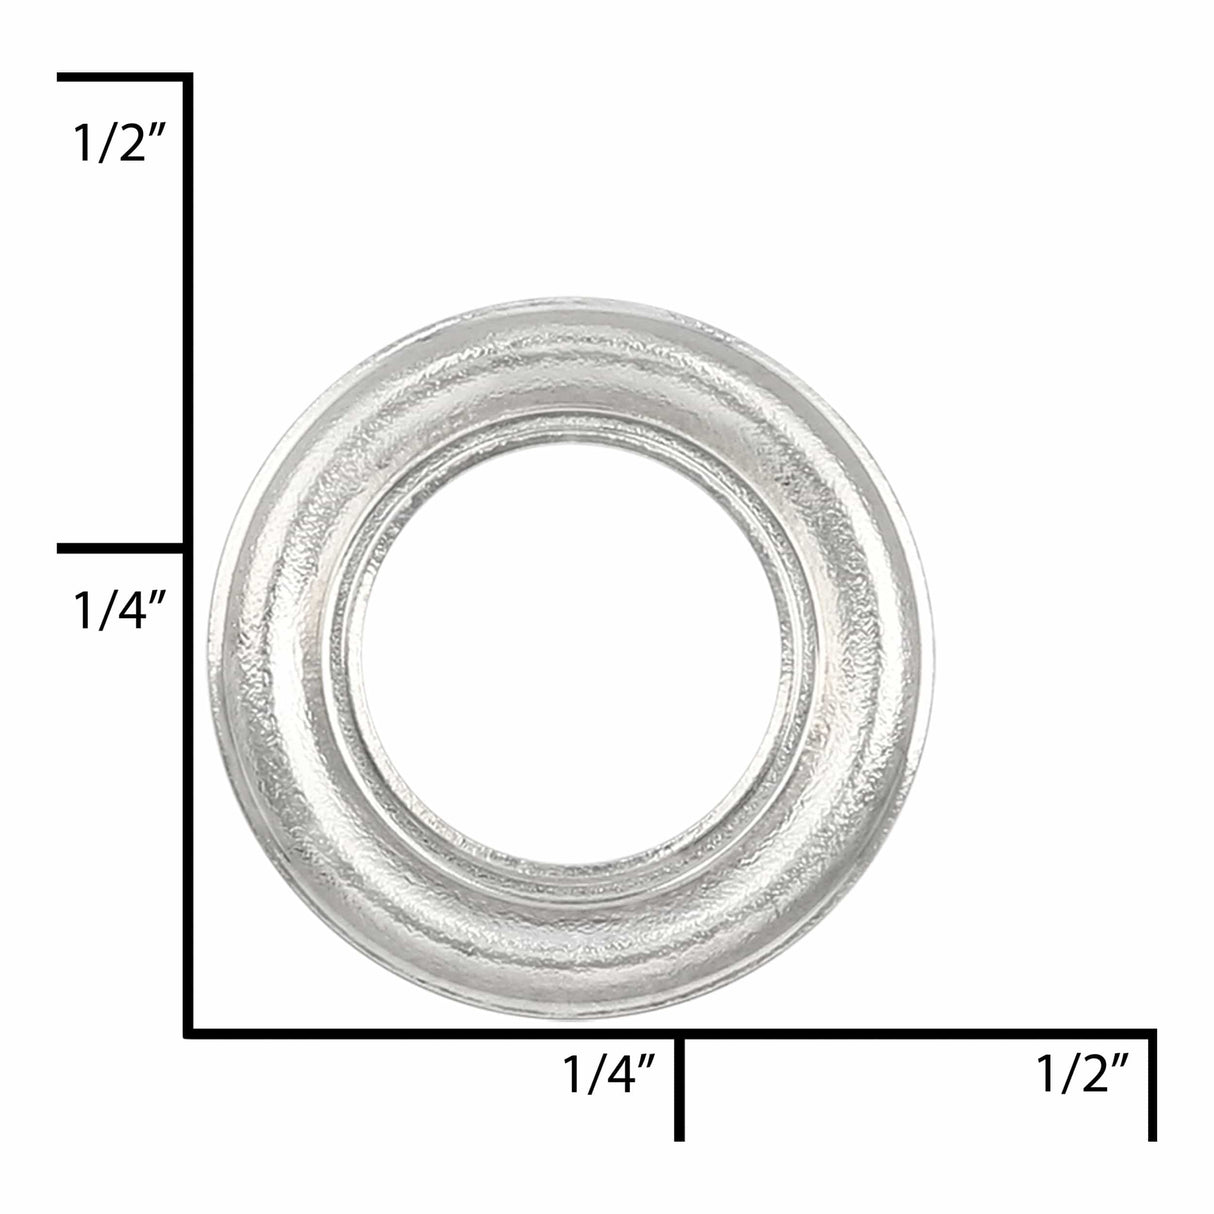 Ohio Travel Bag Fasteners 3/8" Nickel, Washer, Steel - 24 pk, #A-401-NP A-401-NP